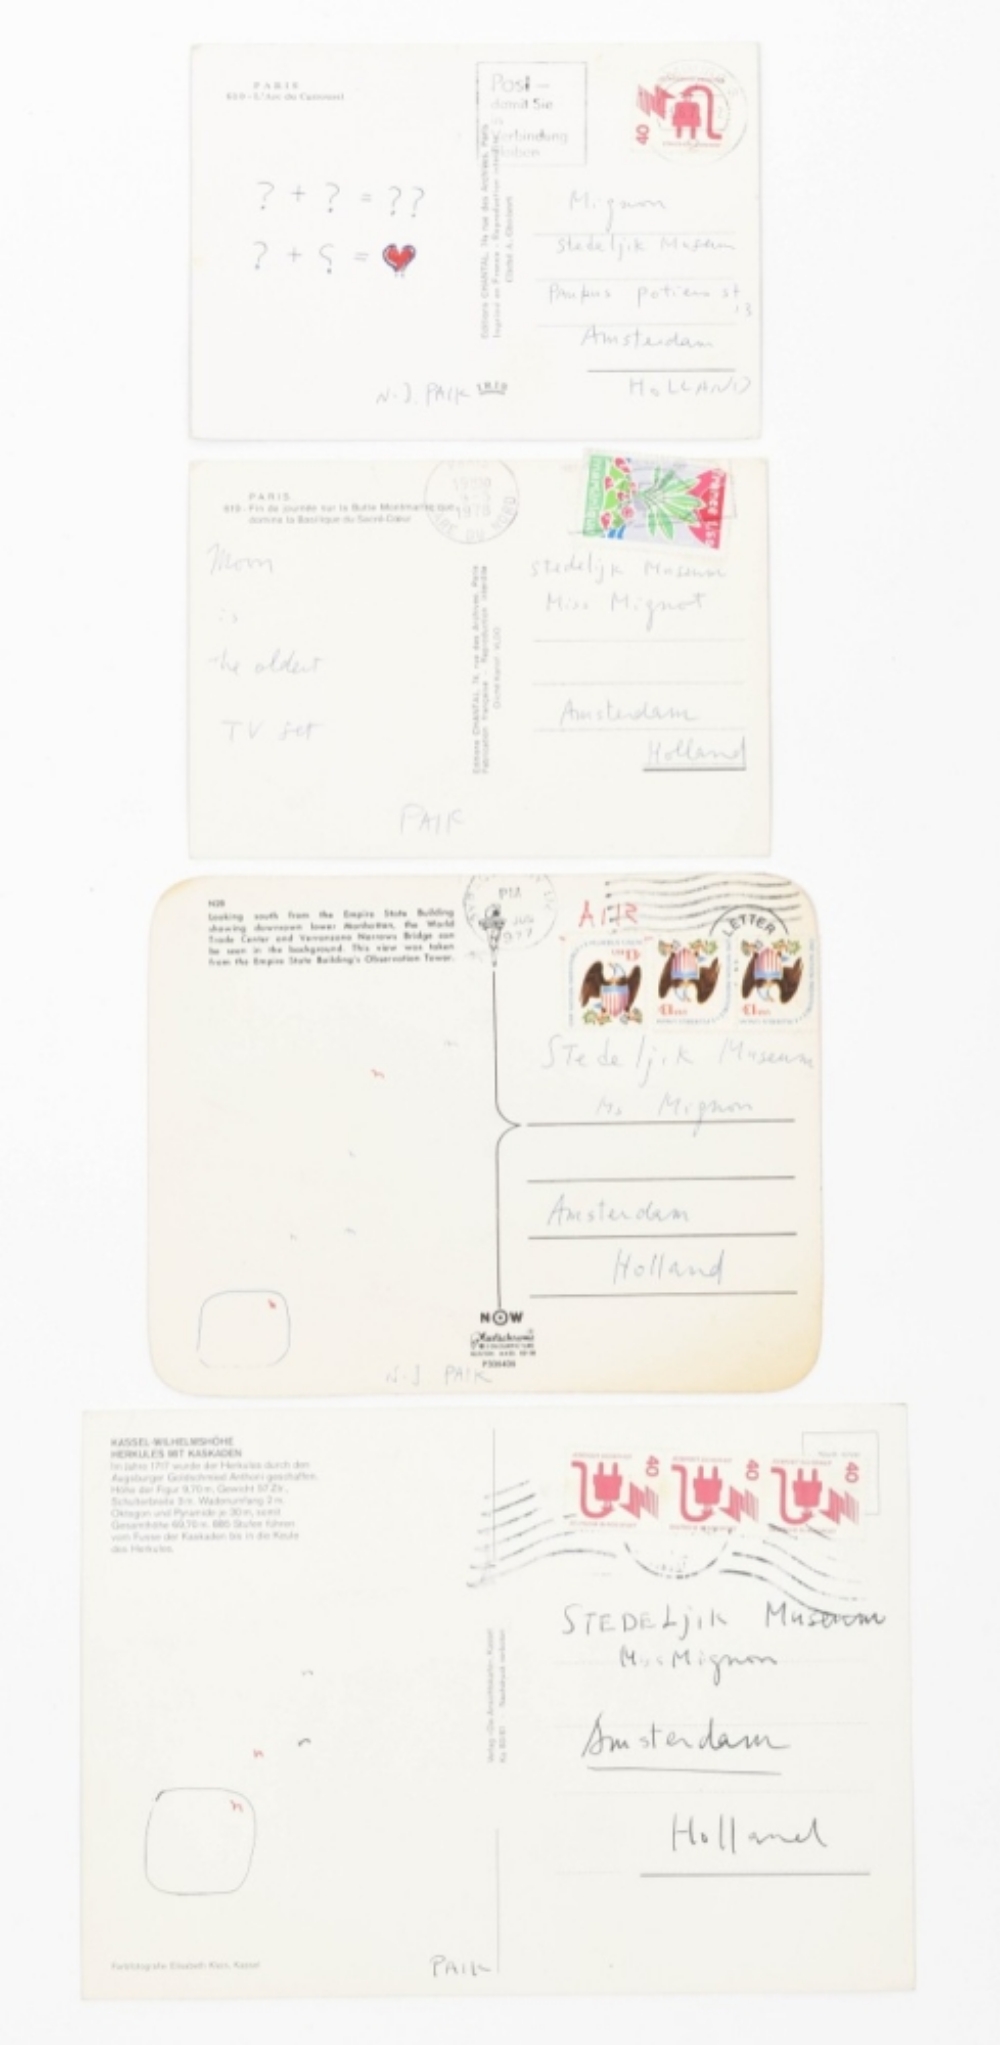 Nam June Paik ephemera from the collection of Dorine Mignot and Wim Beeren - Image 2 of 9